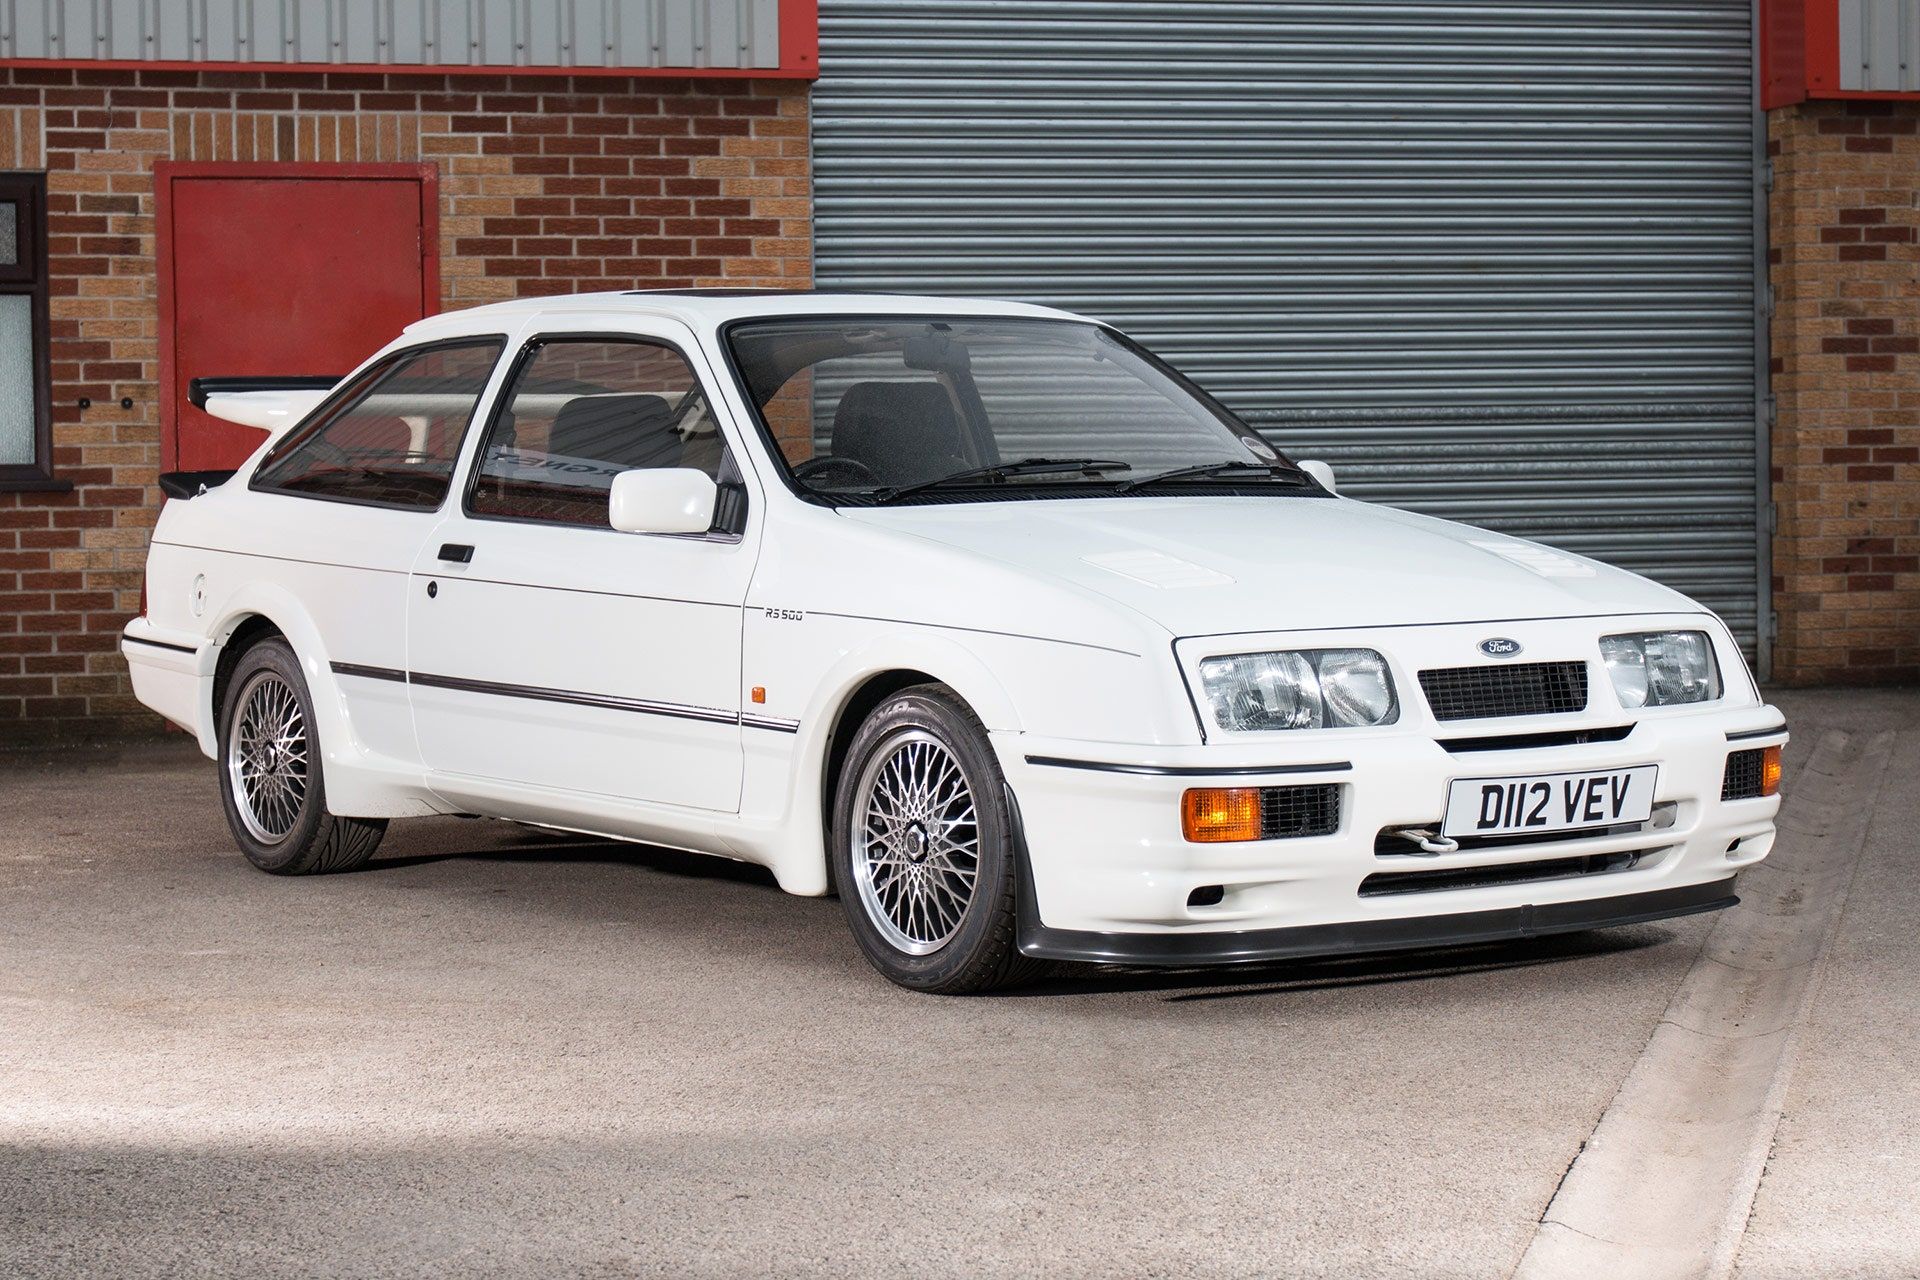 Ford Sierra: Why it should be your next classic car